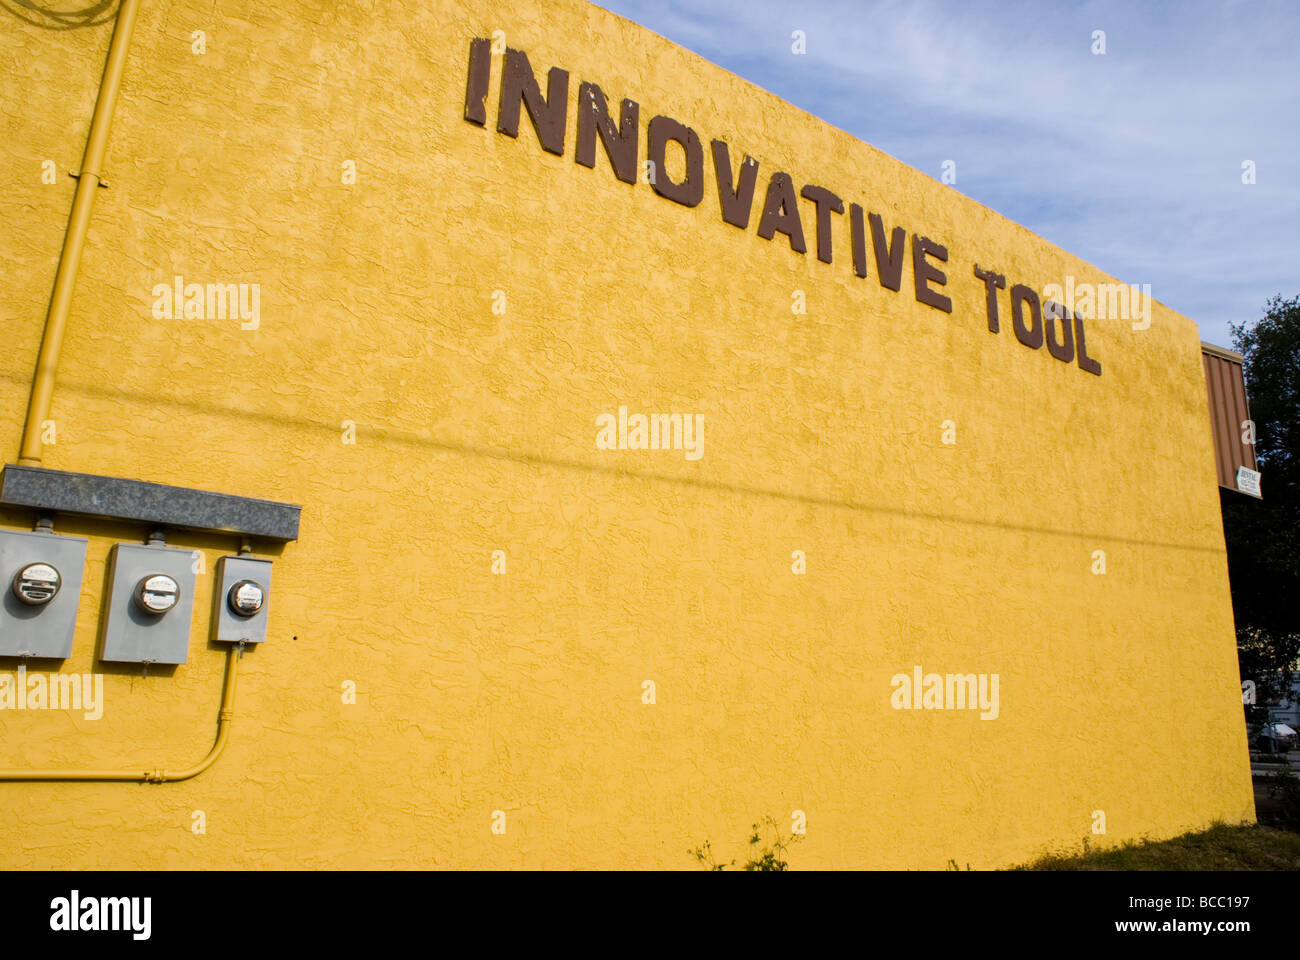 Industrial unit in Cocoa, Florida, with 'Innovative Tool' sign Stock Photo